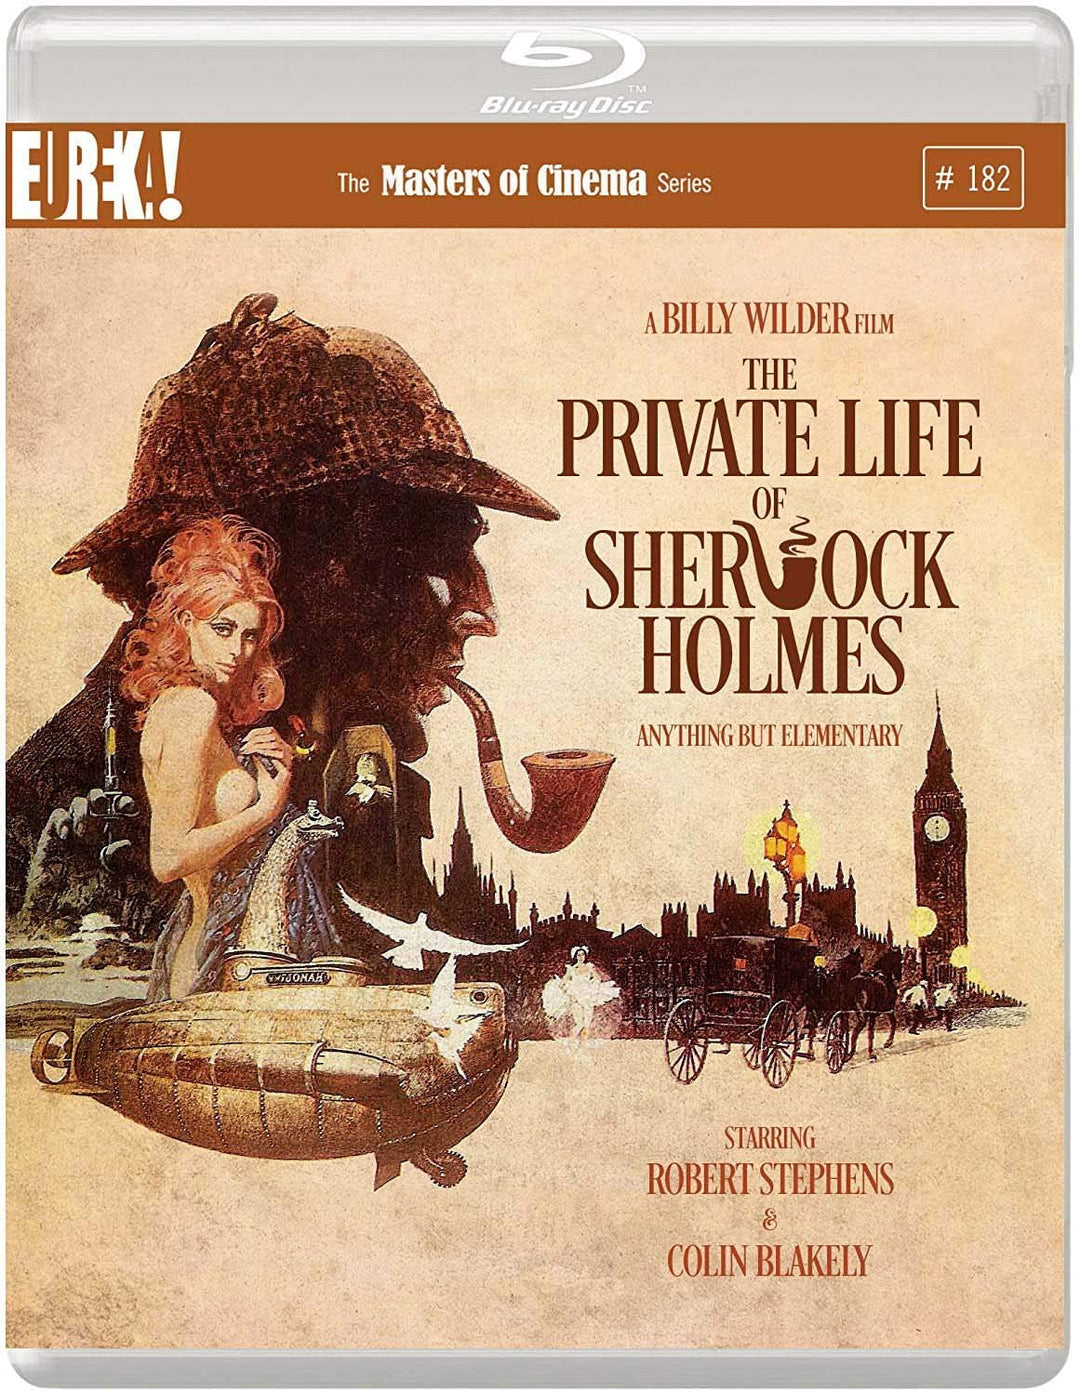 The Private Life of Sherlock Holmes (1970) (Masters of Cinema) [Blu-ray]